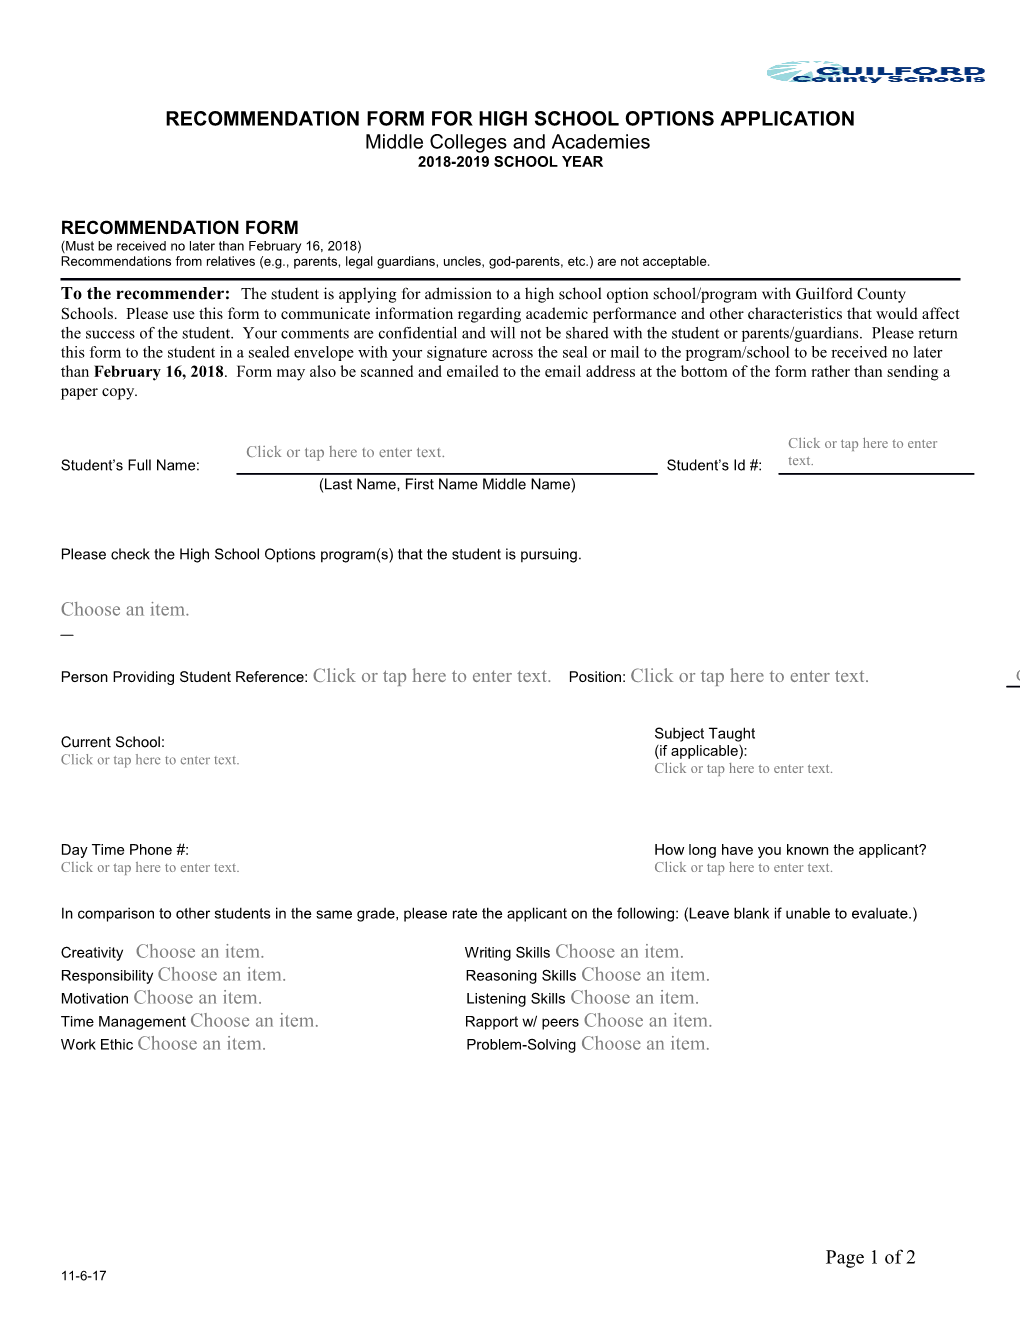 Recommendation Form for High School Options Application